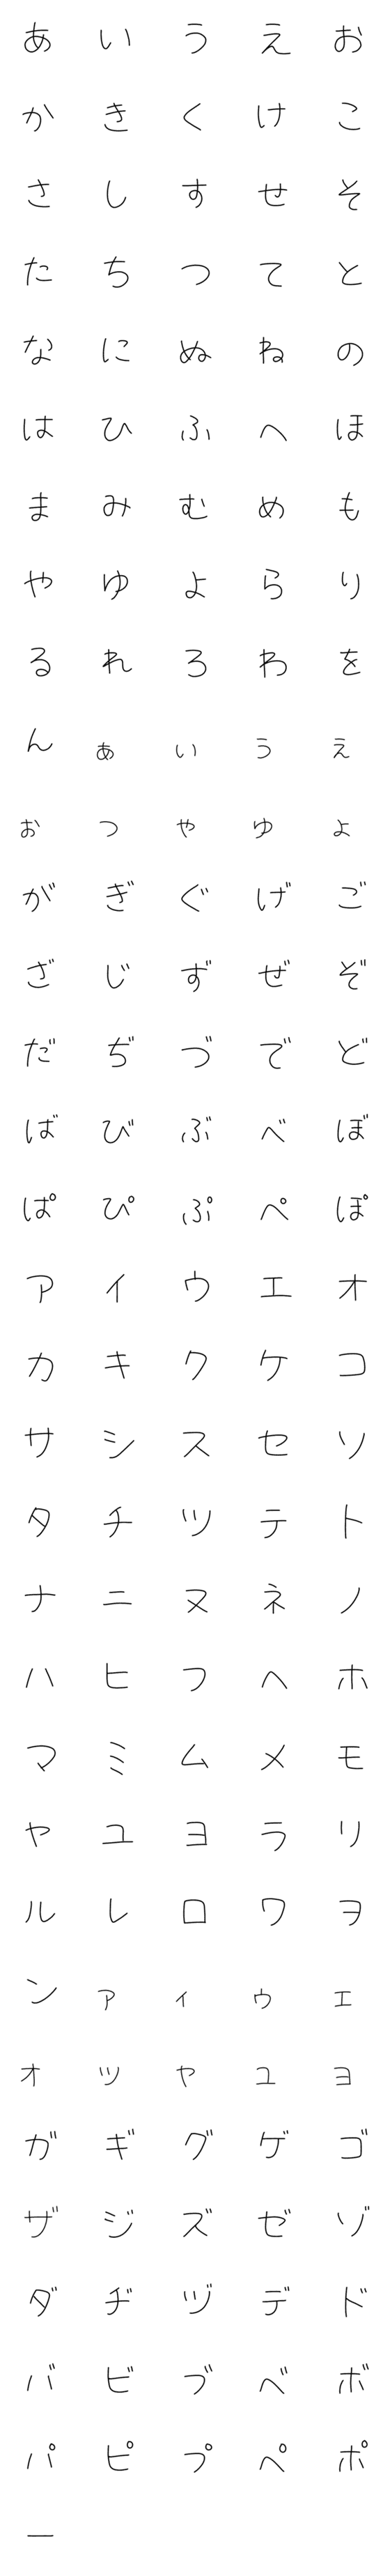 [LINE絵文字]まんまるひらがなの画像一覧